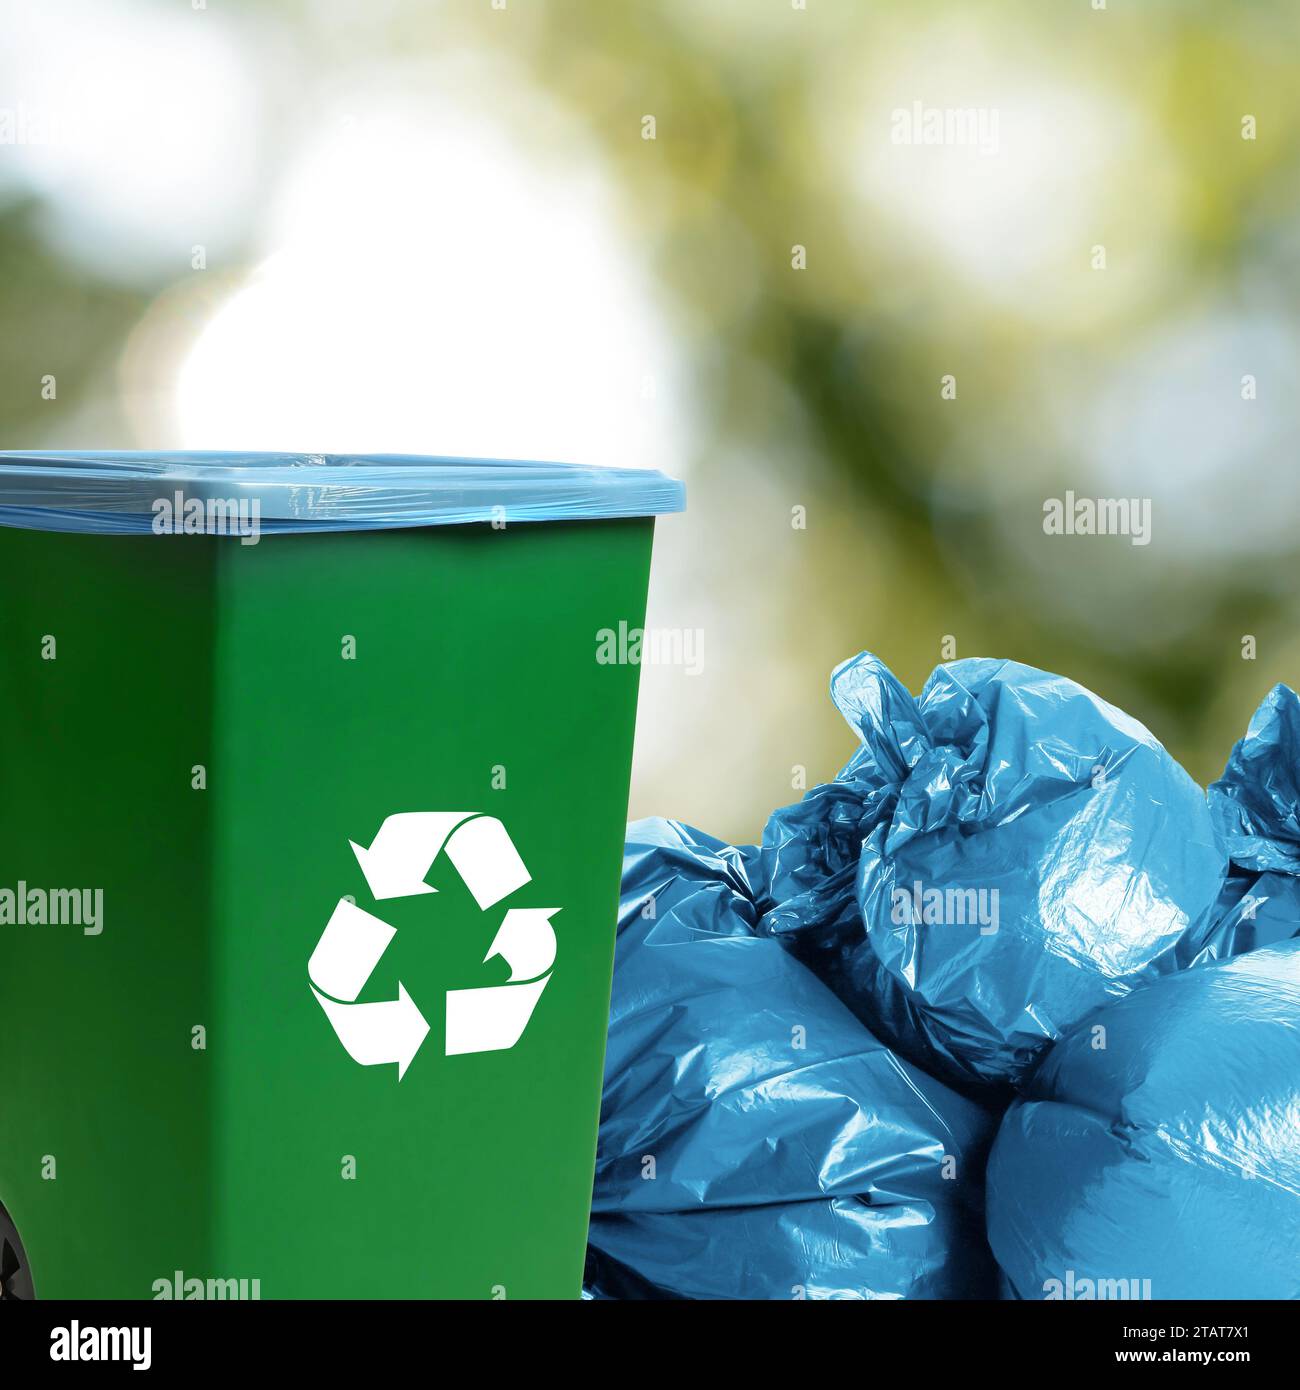 https://c8.alamy.com/comp/2TAT7X1/plastic-bags-full-of-garbage-and-waste-bin-on-blurred-background-space-for-text-2TAT7X1.jpg